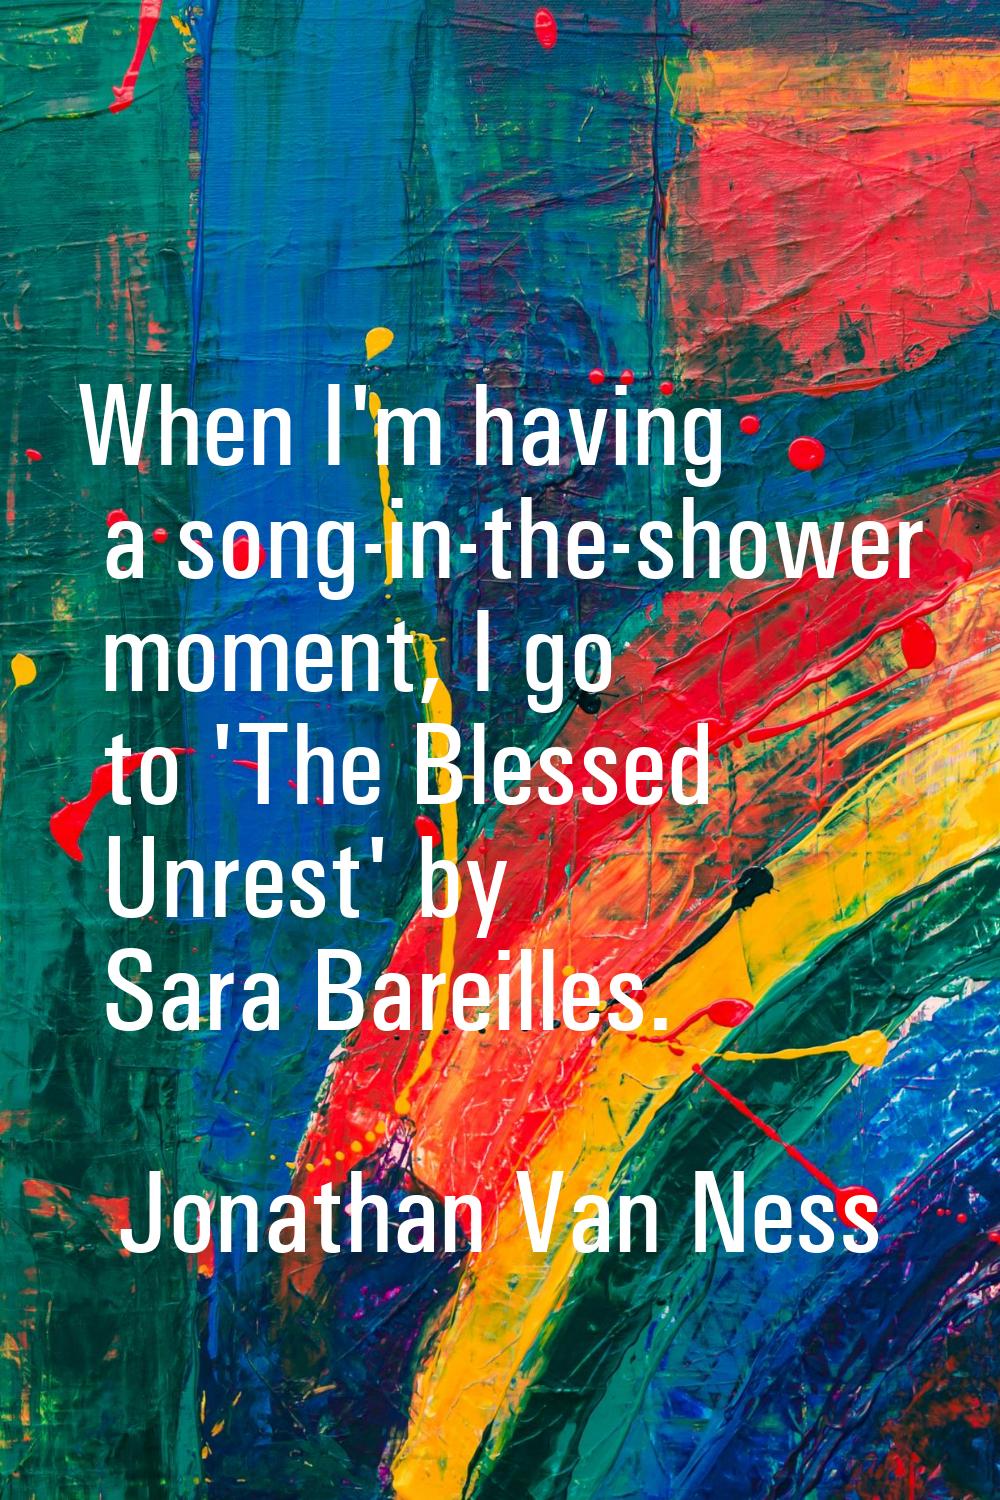 When I'm having a song-in-the-shower moment, I go to 'The Blessed Unrest' by Sara Bareilles.